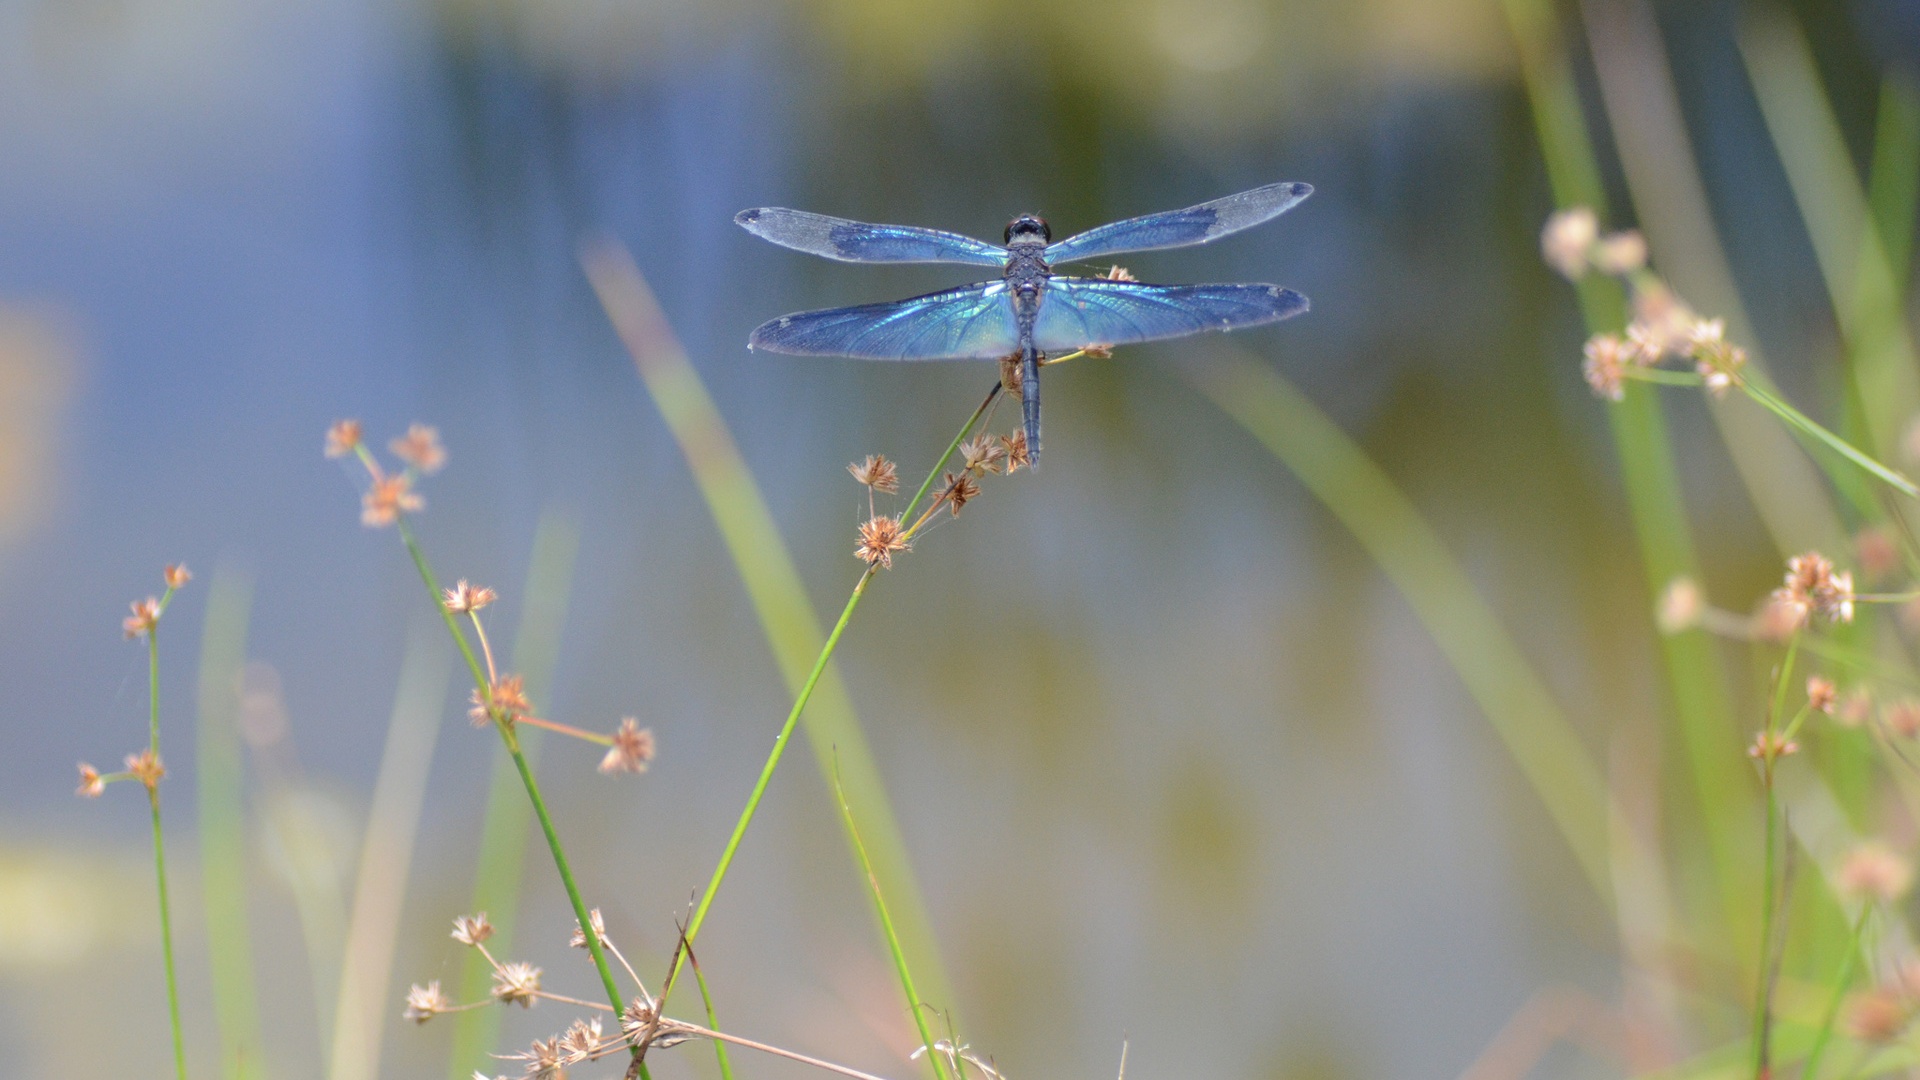 Insect Dragonfly Macro Photography Wallpaper Desktop